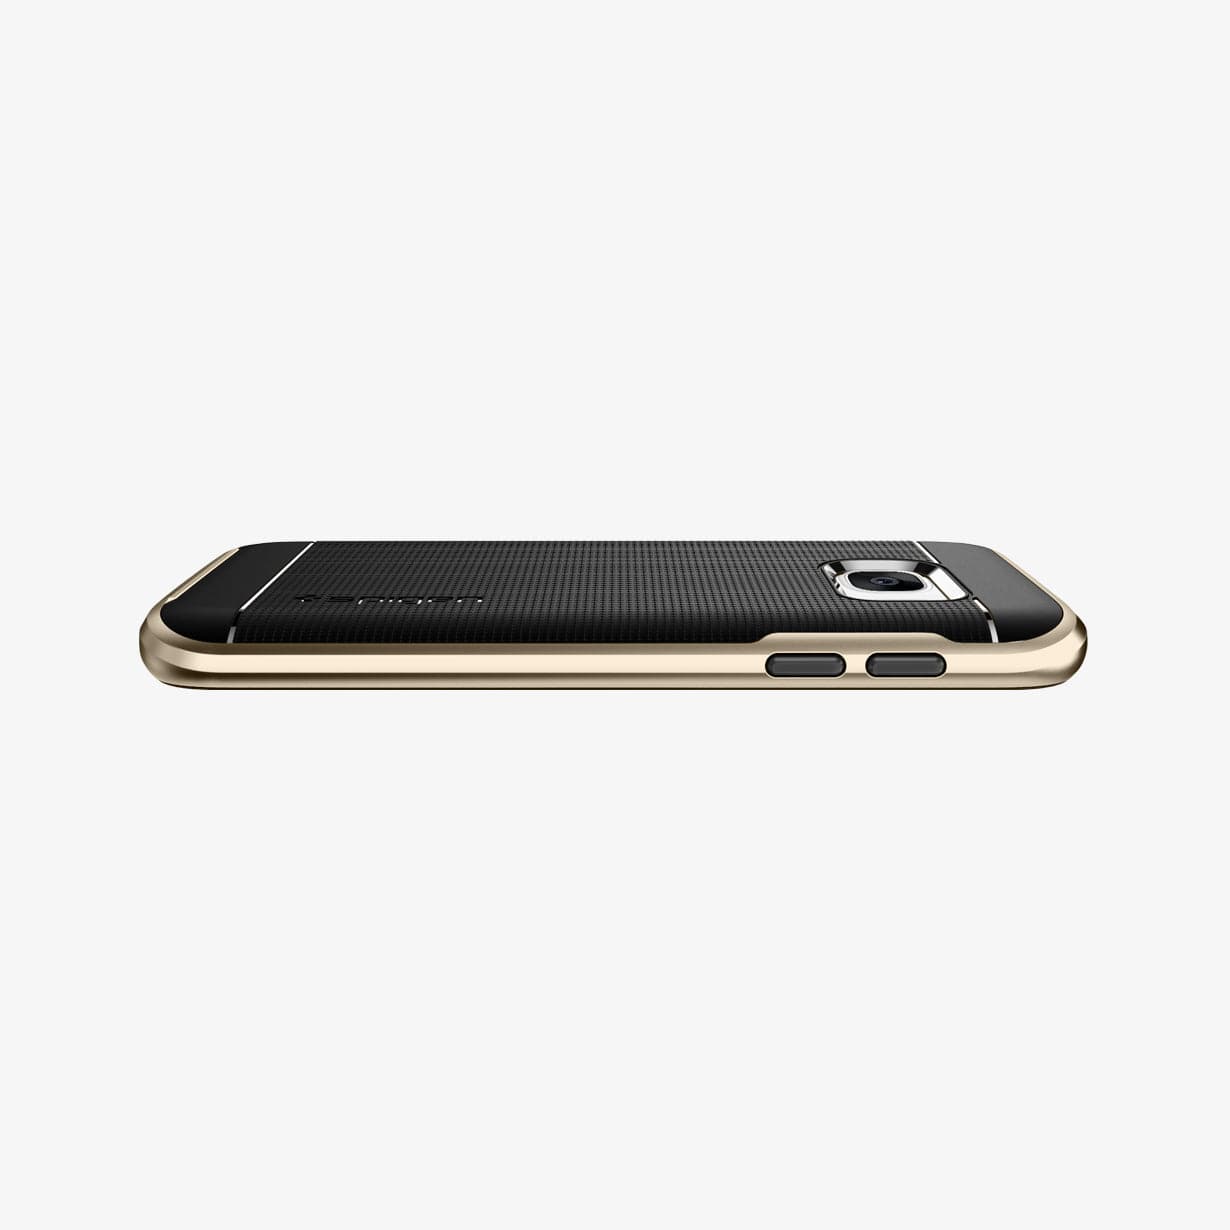 555CS20202 - Galaxy S7 Series Neo Hybrid Case in champagne gold showing the side and partial back